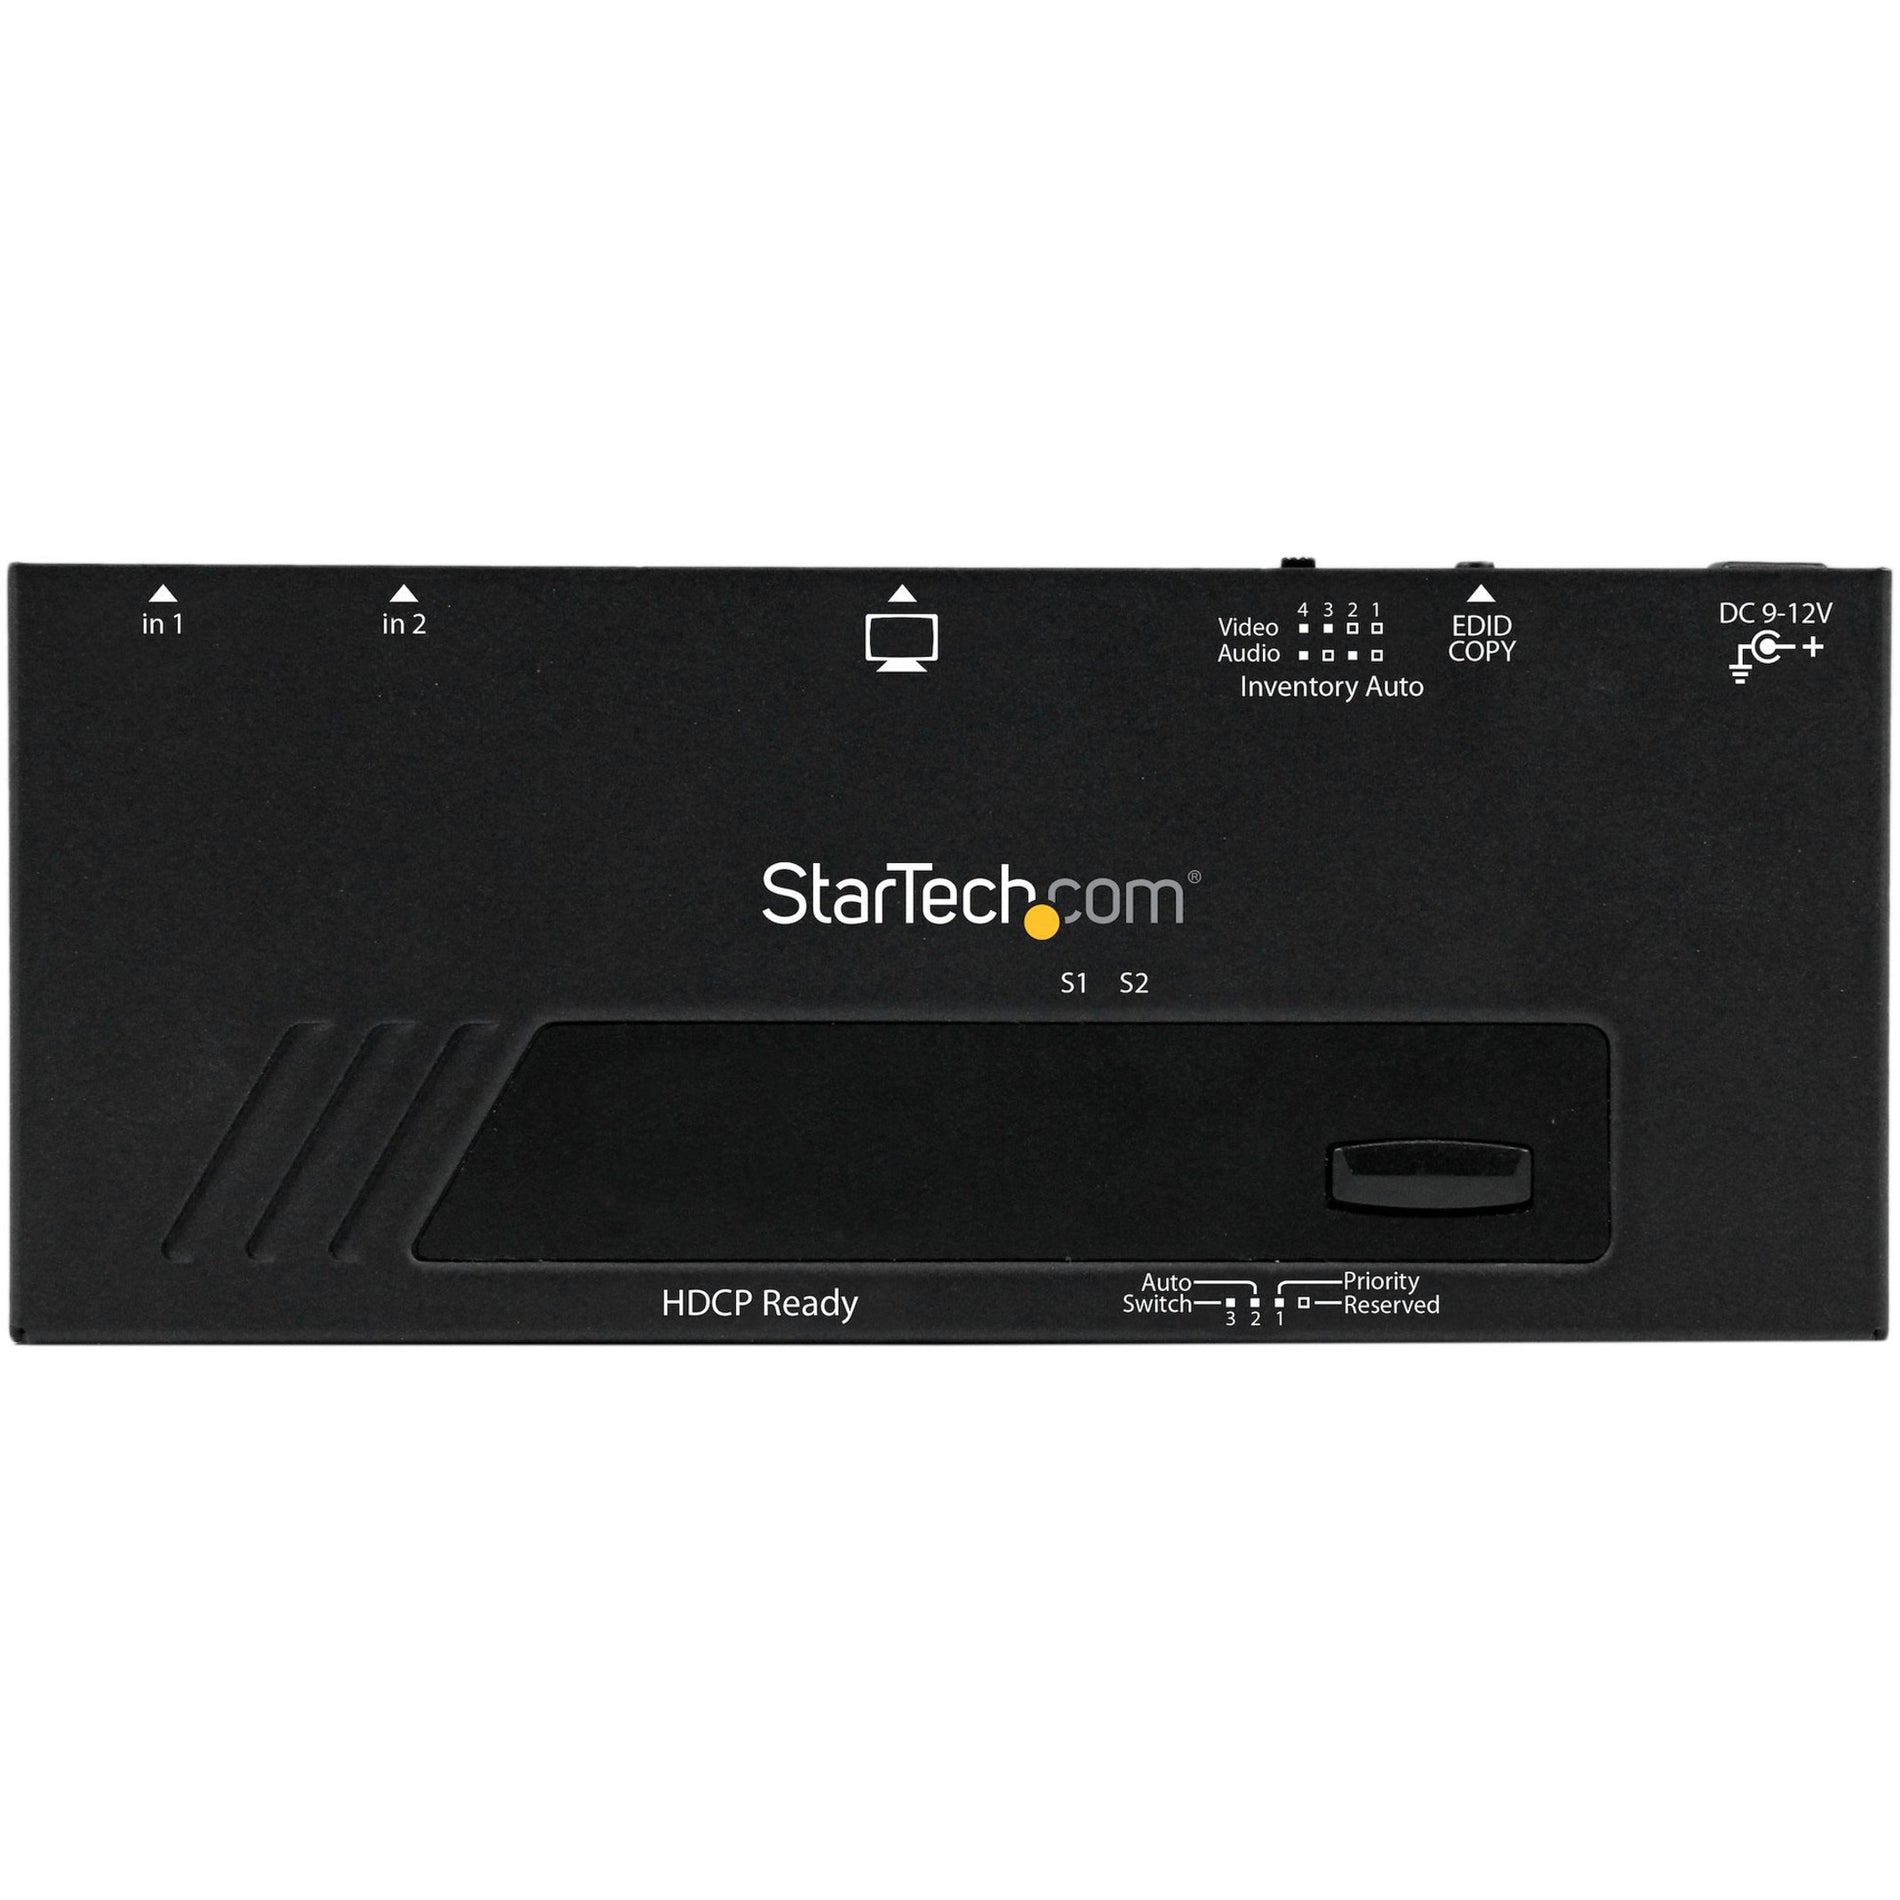 StarTech.com VS221HDQ 2 Port HDMI Switch w/ Automatic and Priority Switching - 1080p, Full HD, 2 Year Warranty